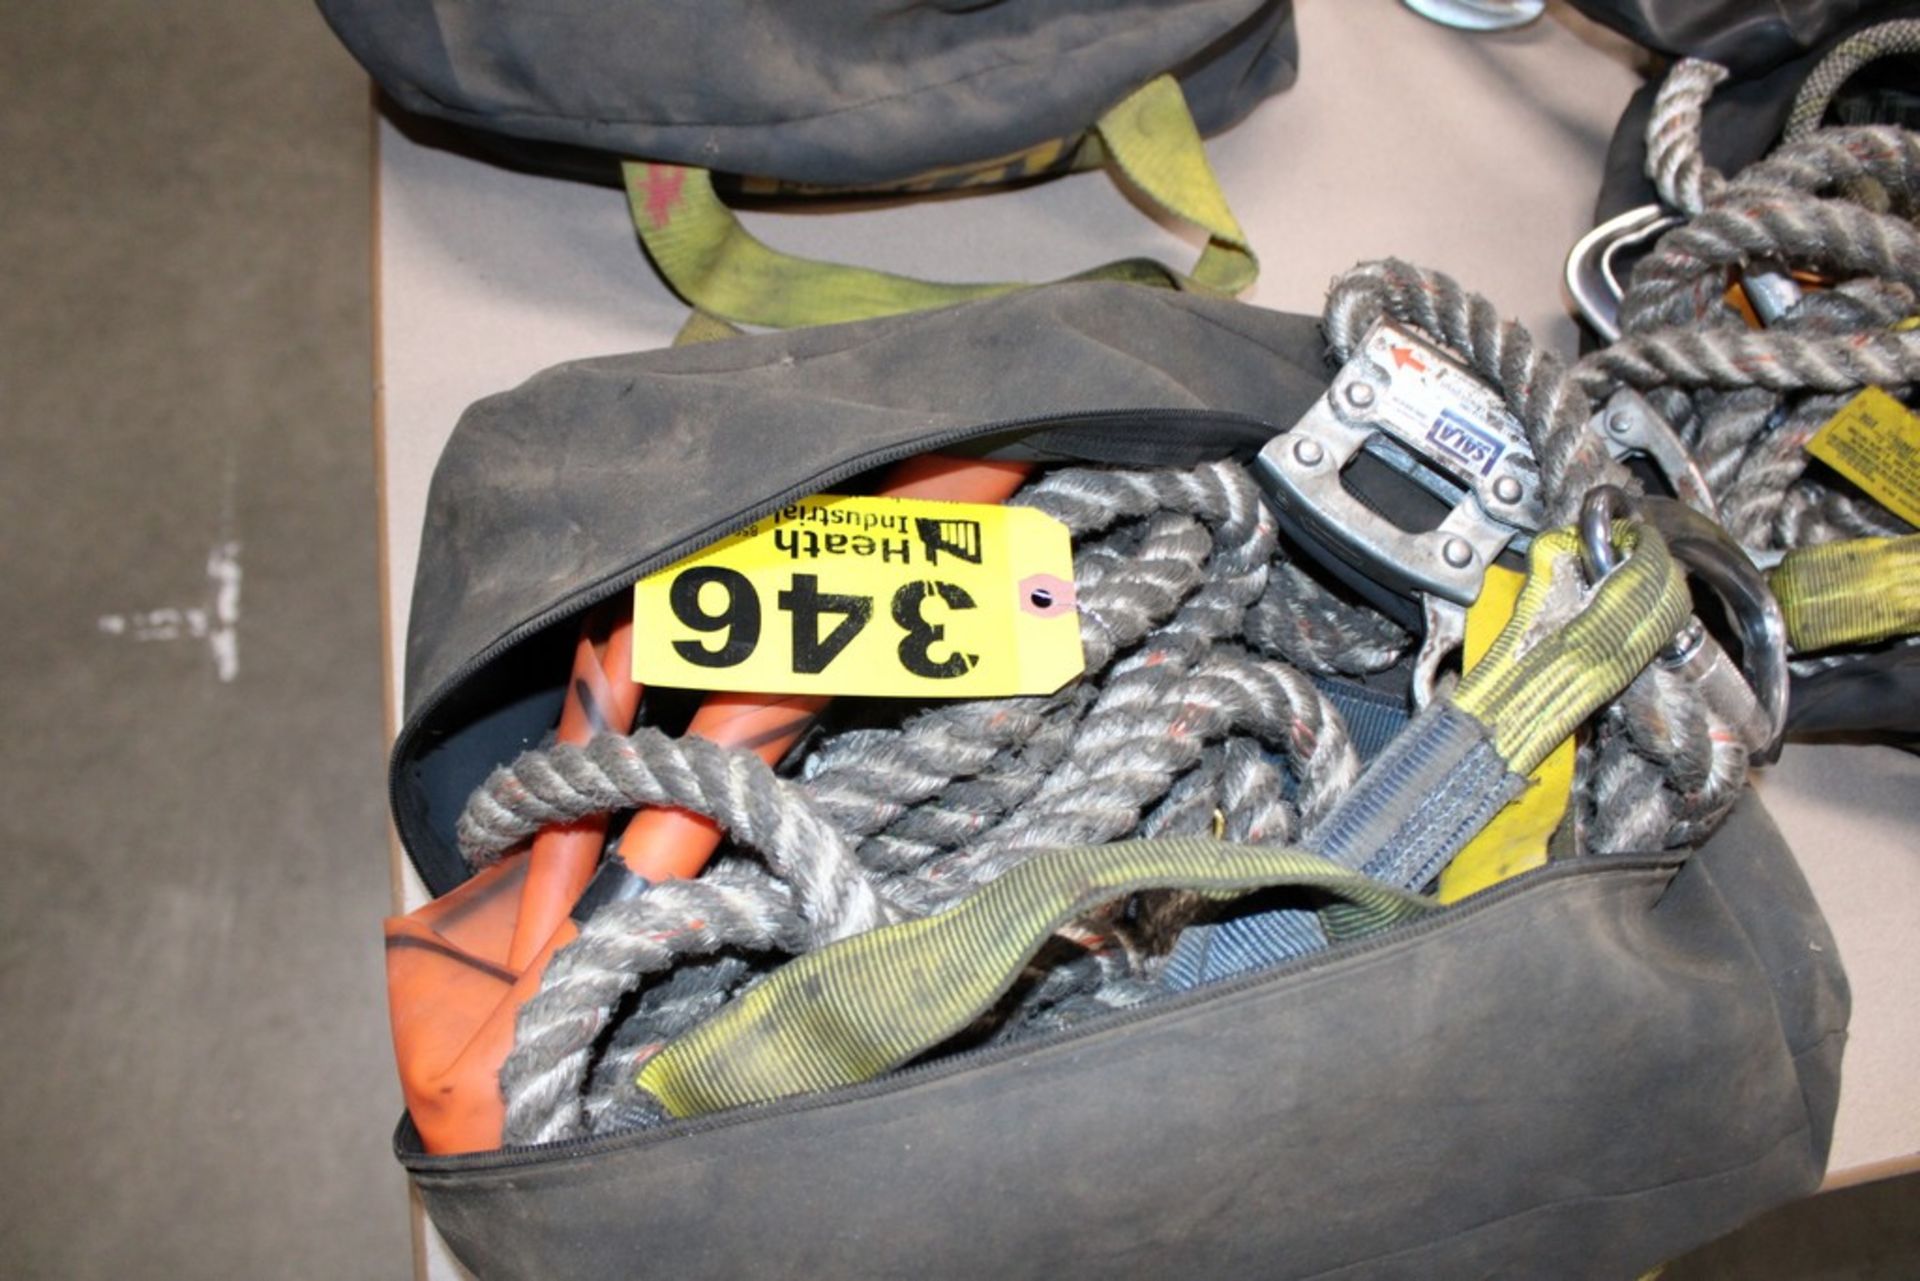 BAG OF SAFETY ROPE AND LANYARDS